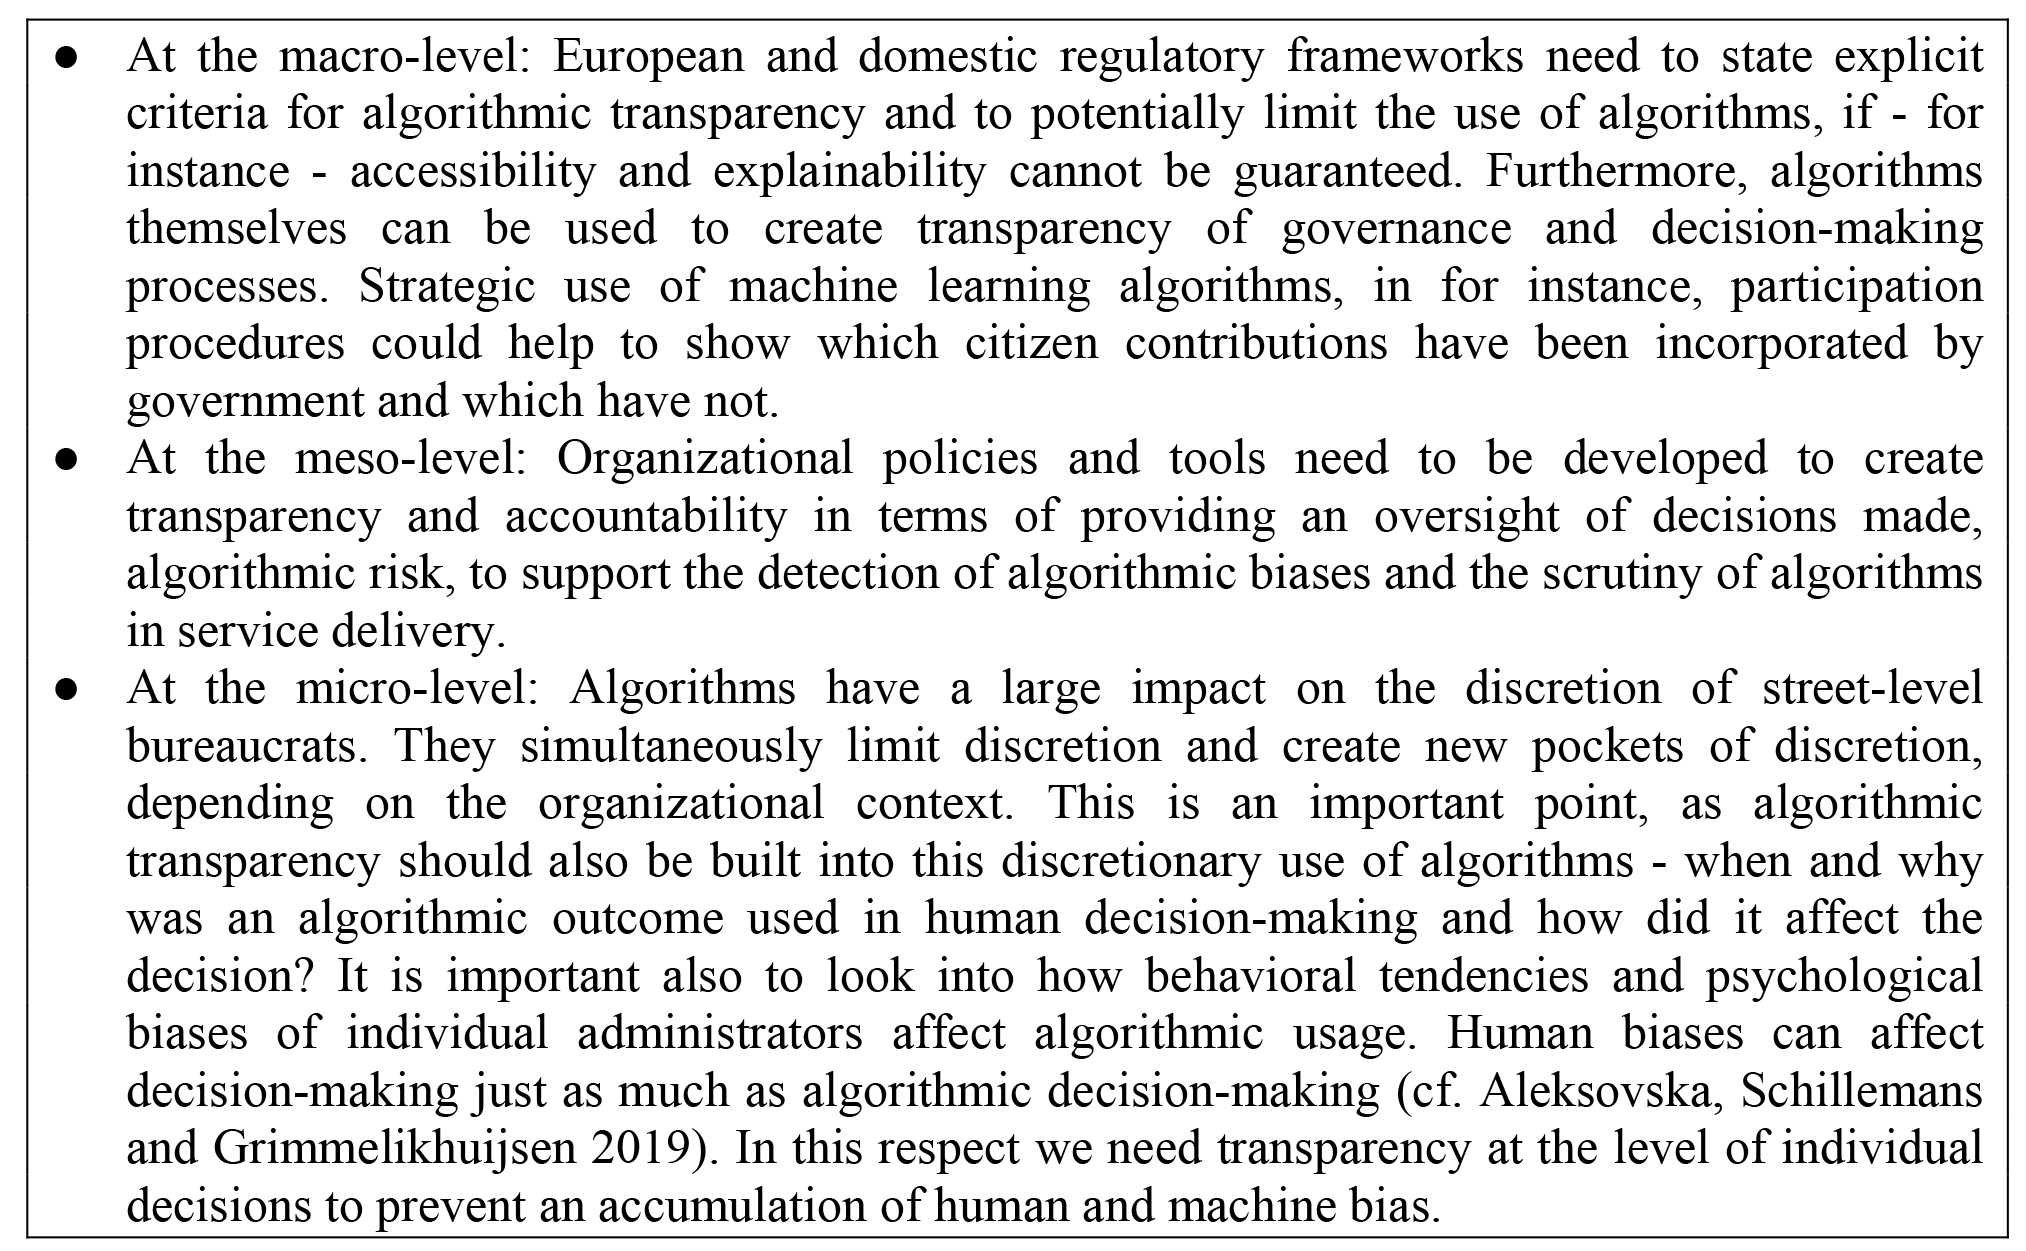 Areas for improvement of algorithmic transparency and decision-making.